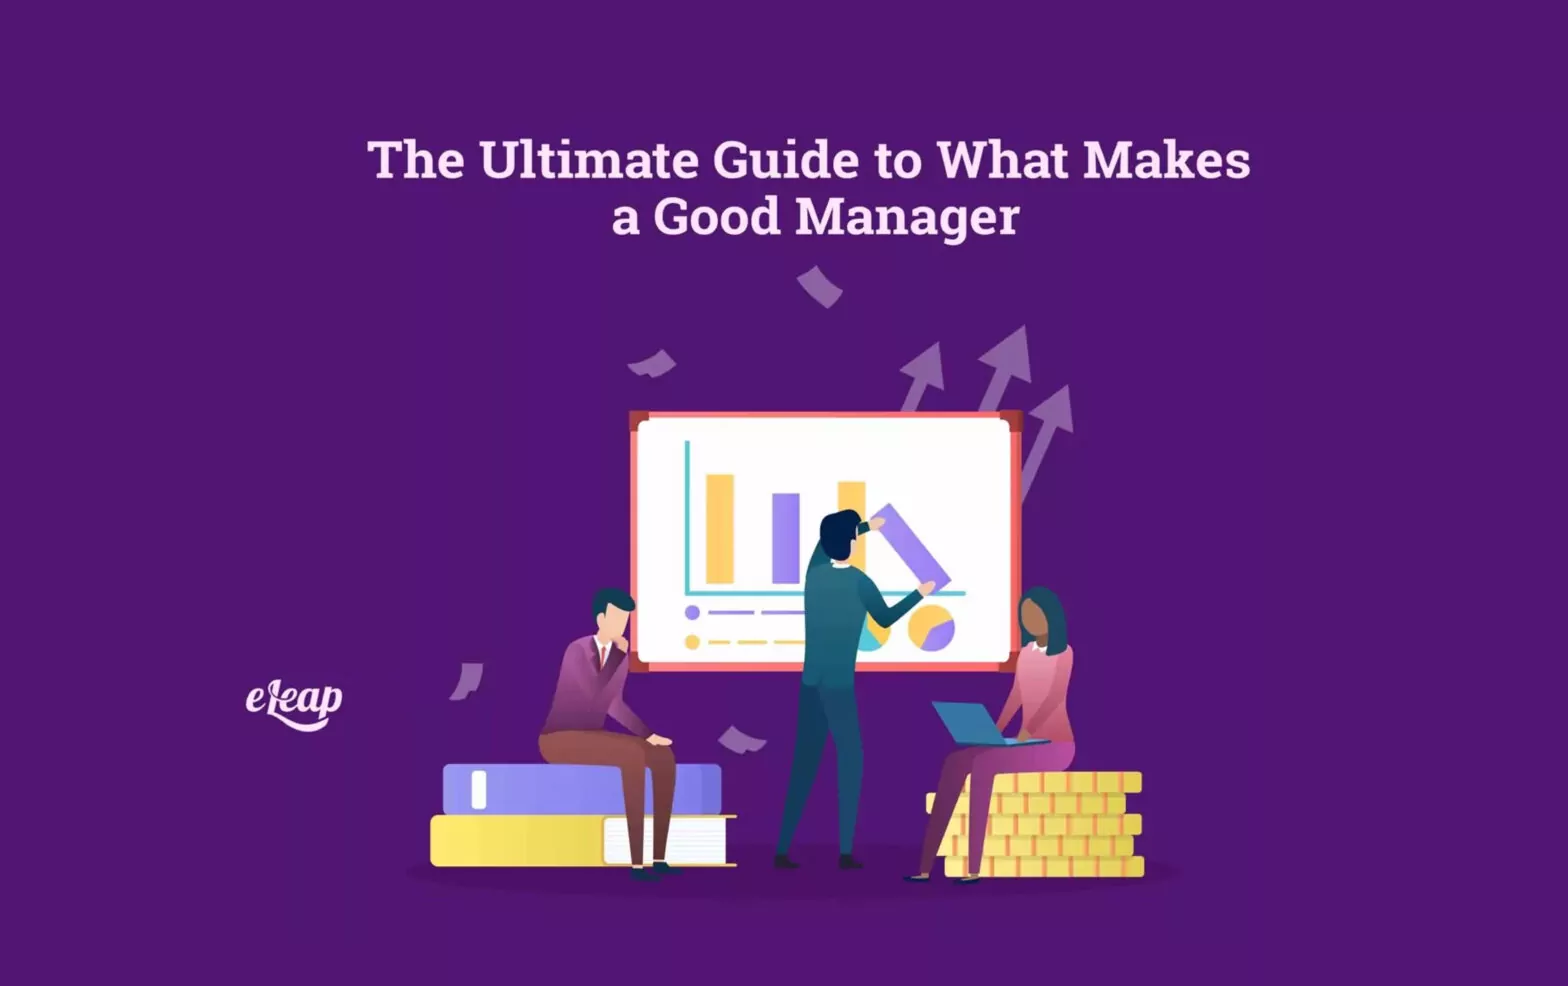 The Ultimate Guide to What Makes a Good Manager